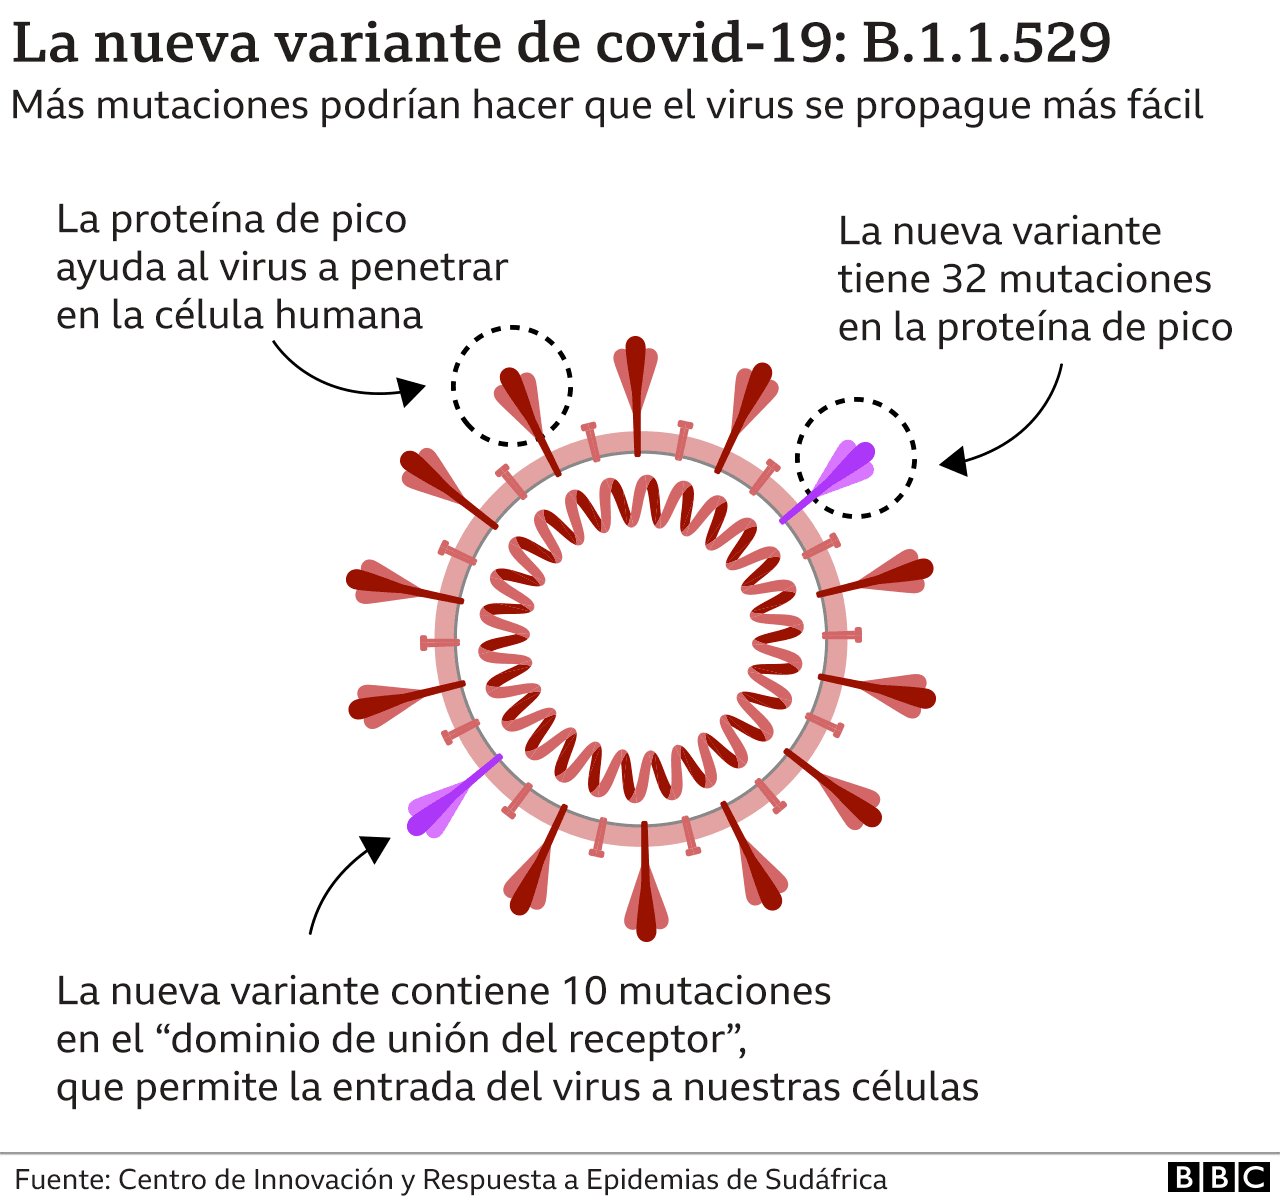 “The next pandemic could be more contagious or deadly than COVID-19”: Sarah Gilbert, creator of the Oxford-AstraZeneca vaccine